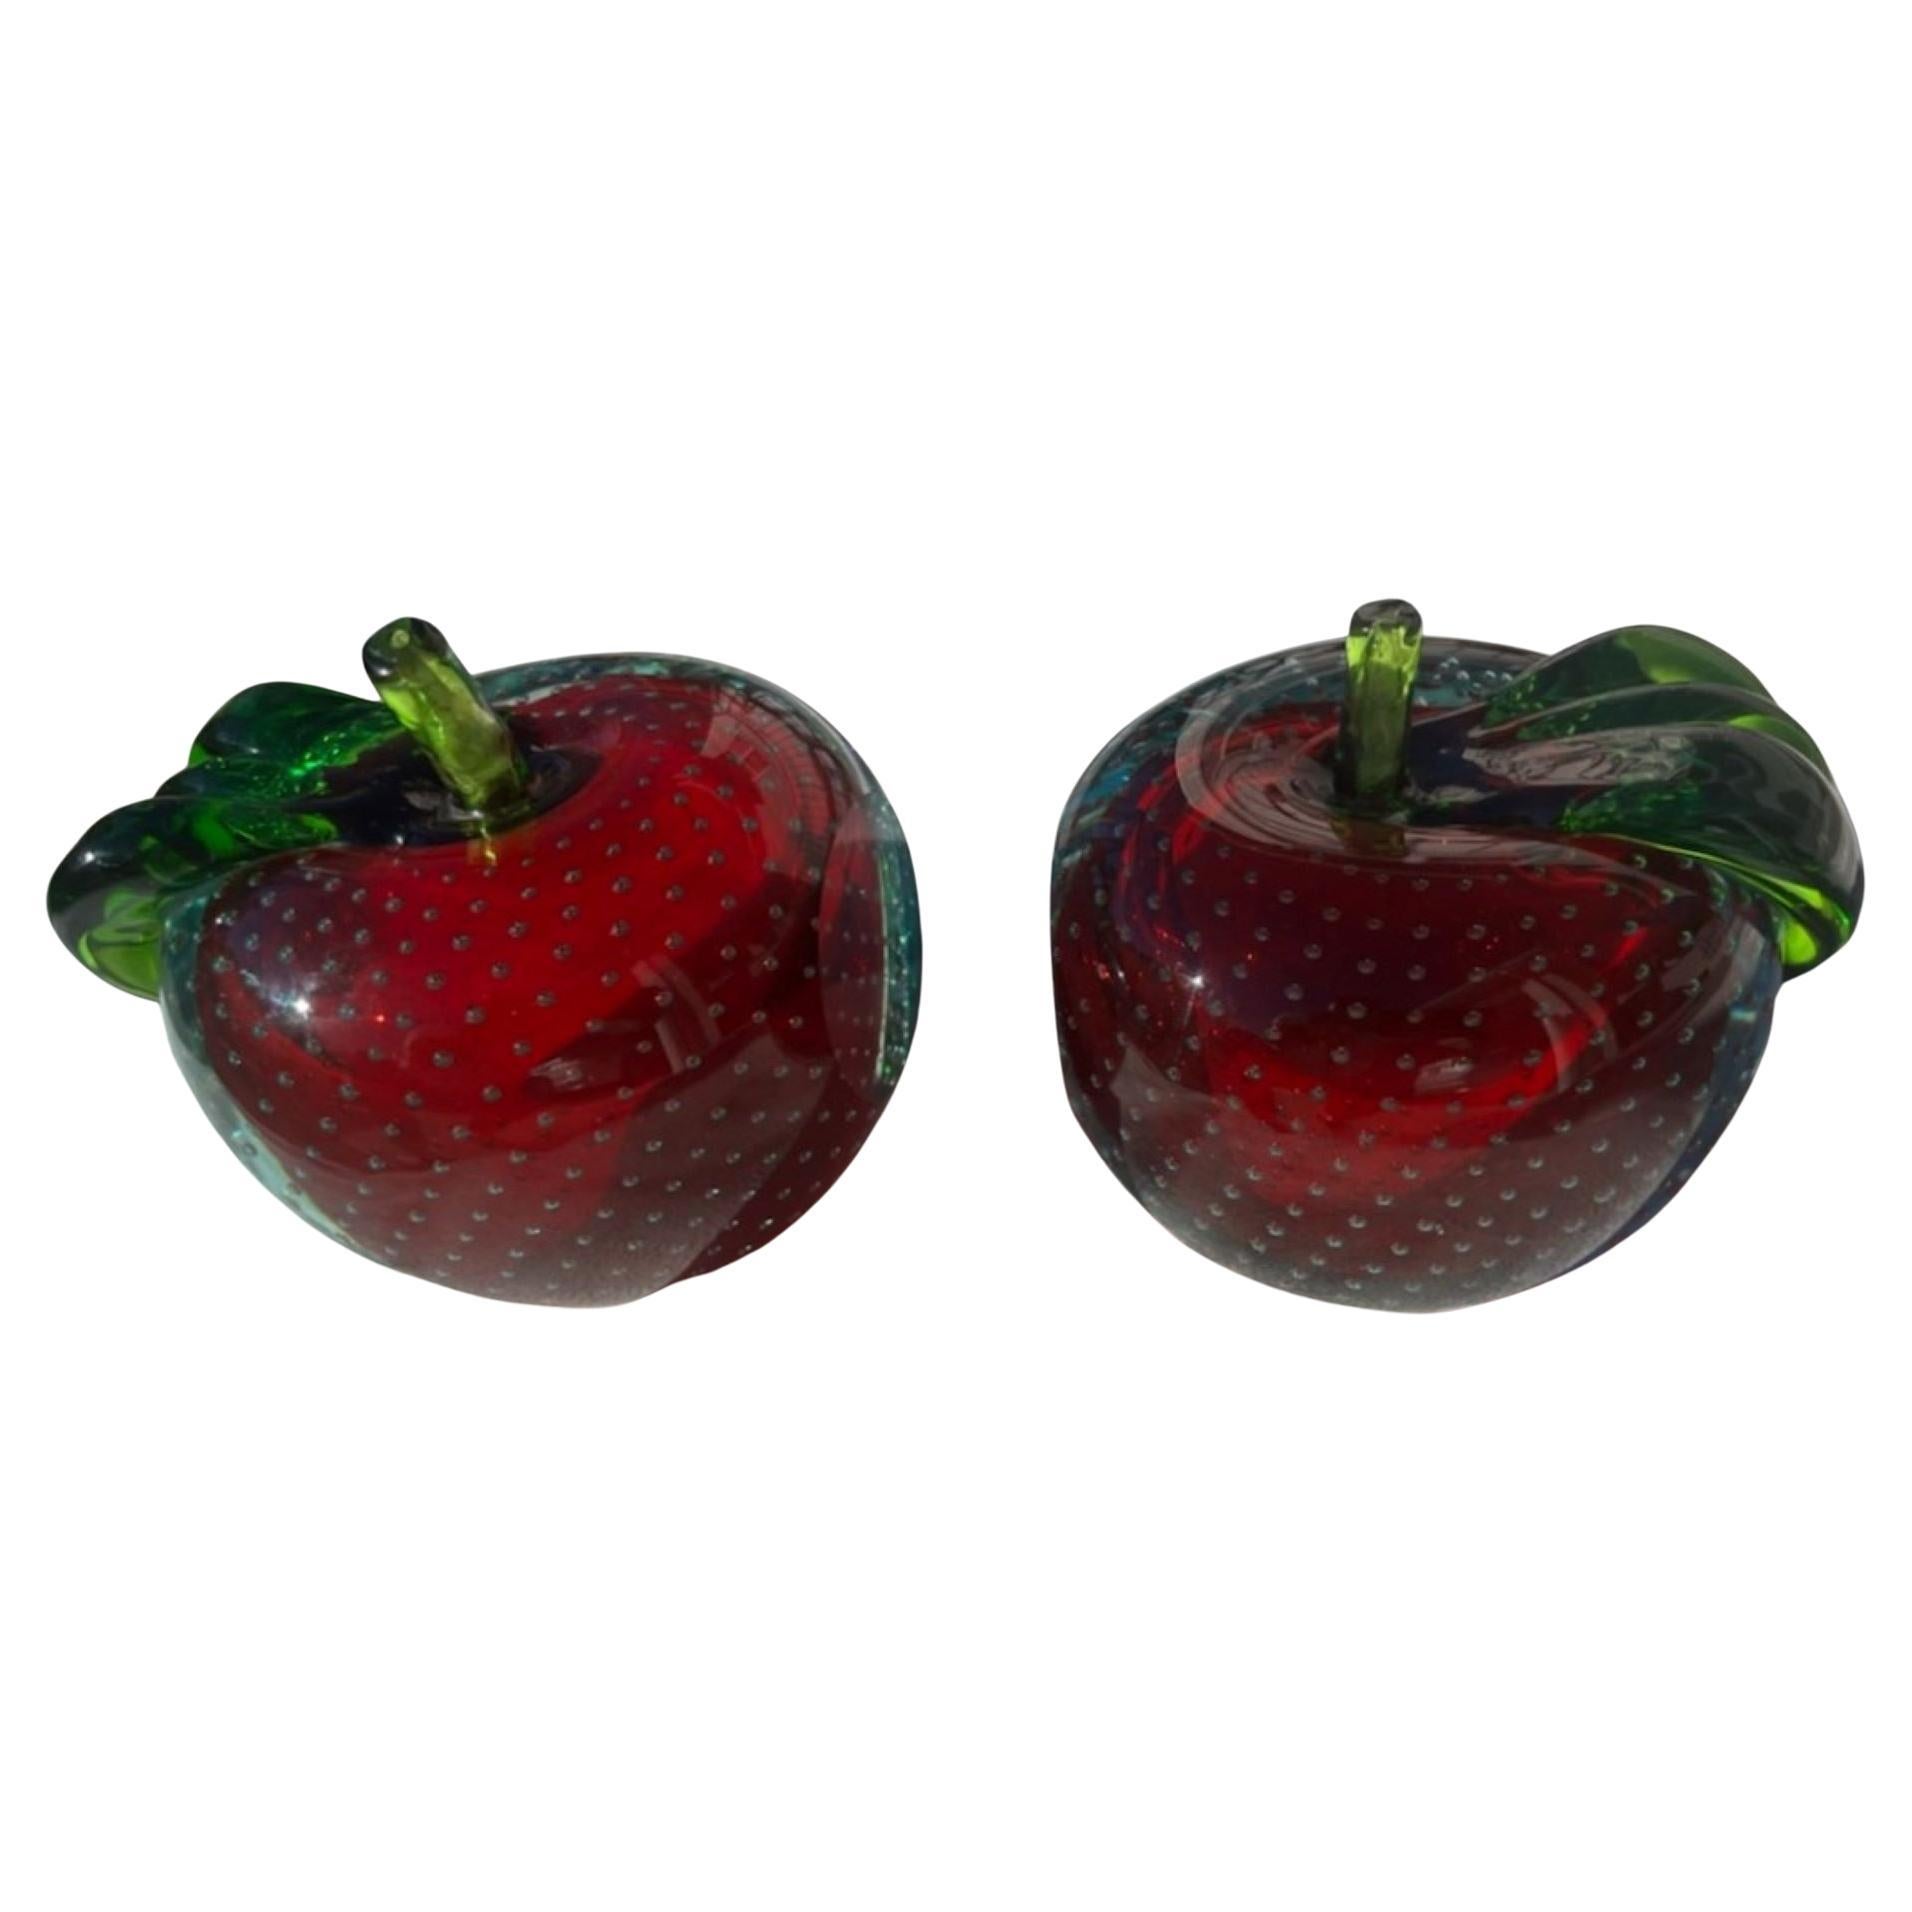 Early Italian Art Glass pair of Apples Bookends  For Sale